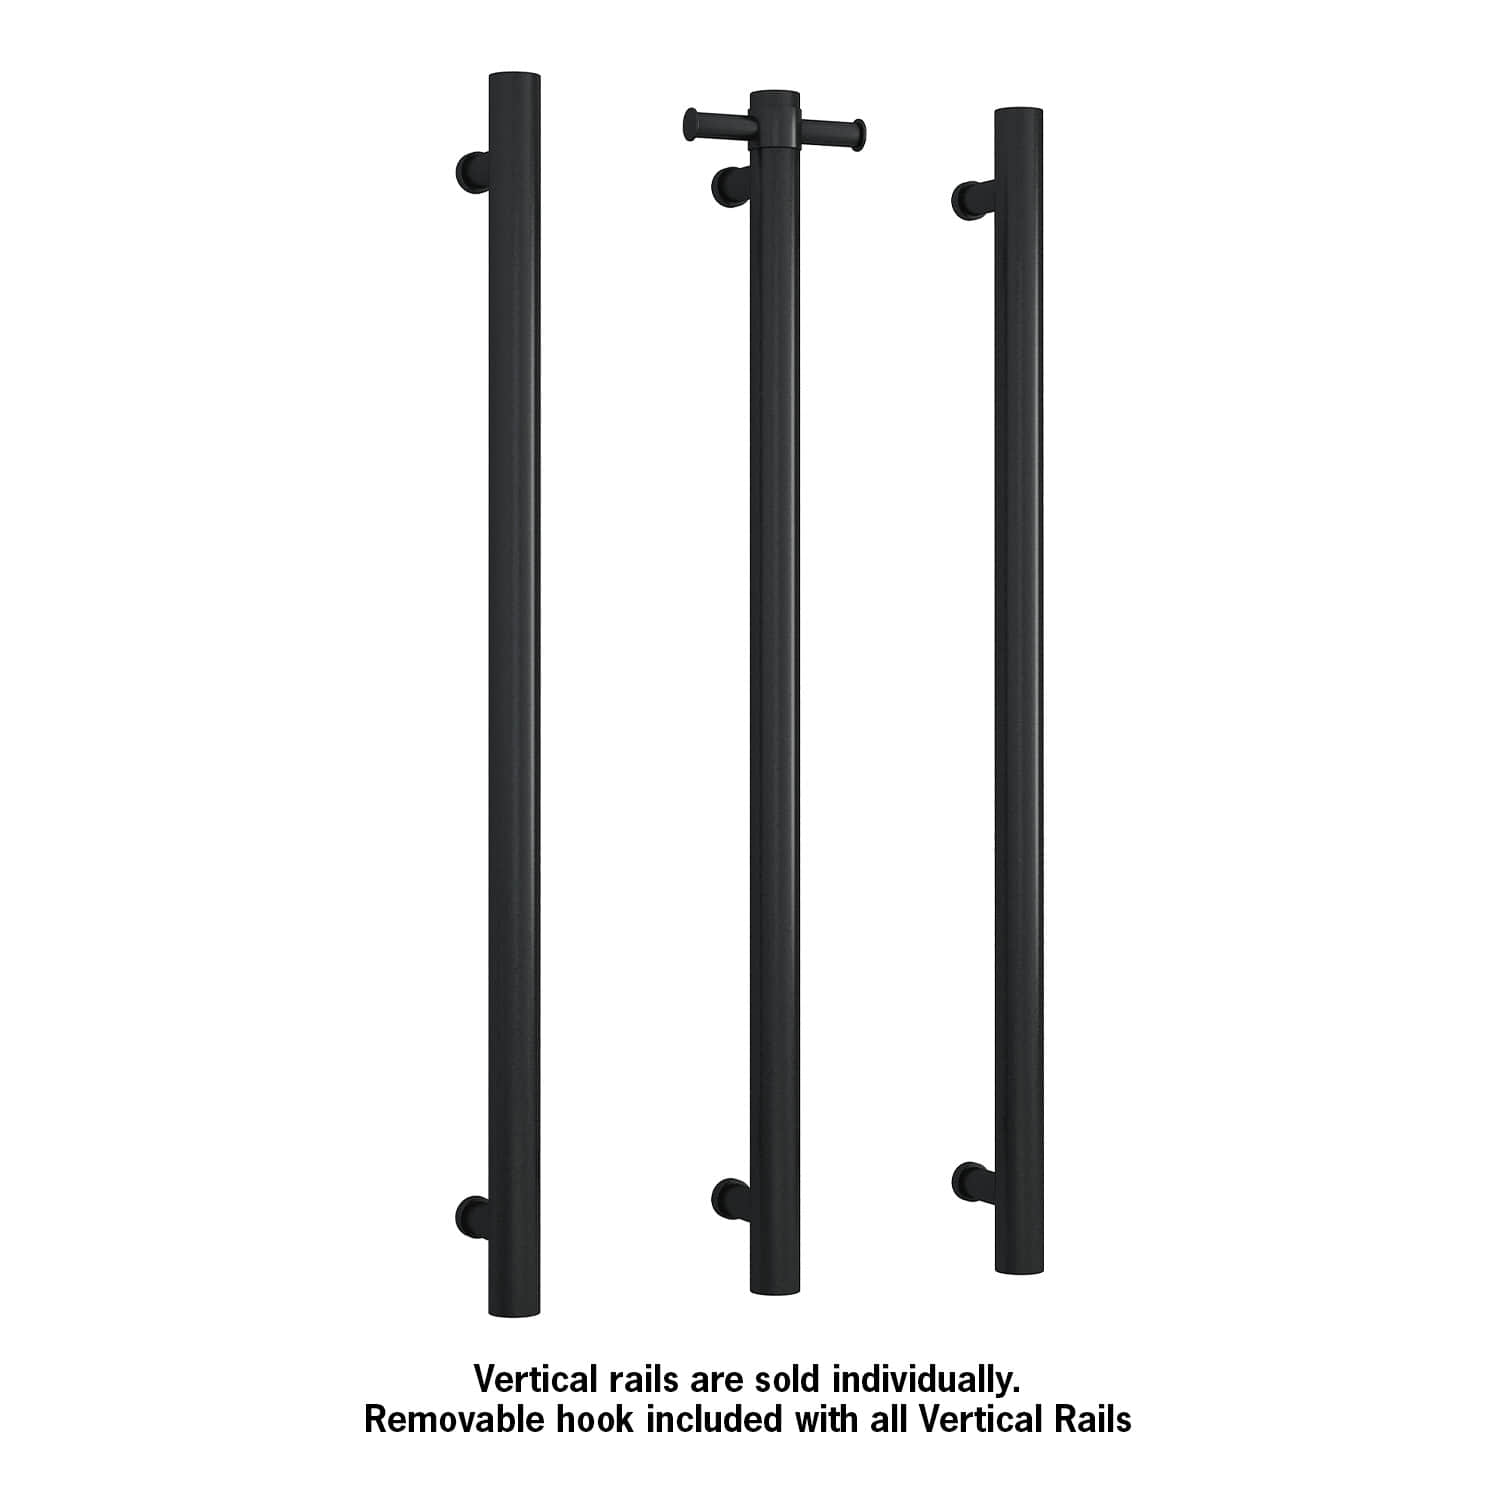 Matte Black Single heated towel rail from Infinity Plus bathrooms deliver AU wide